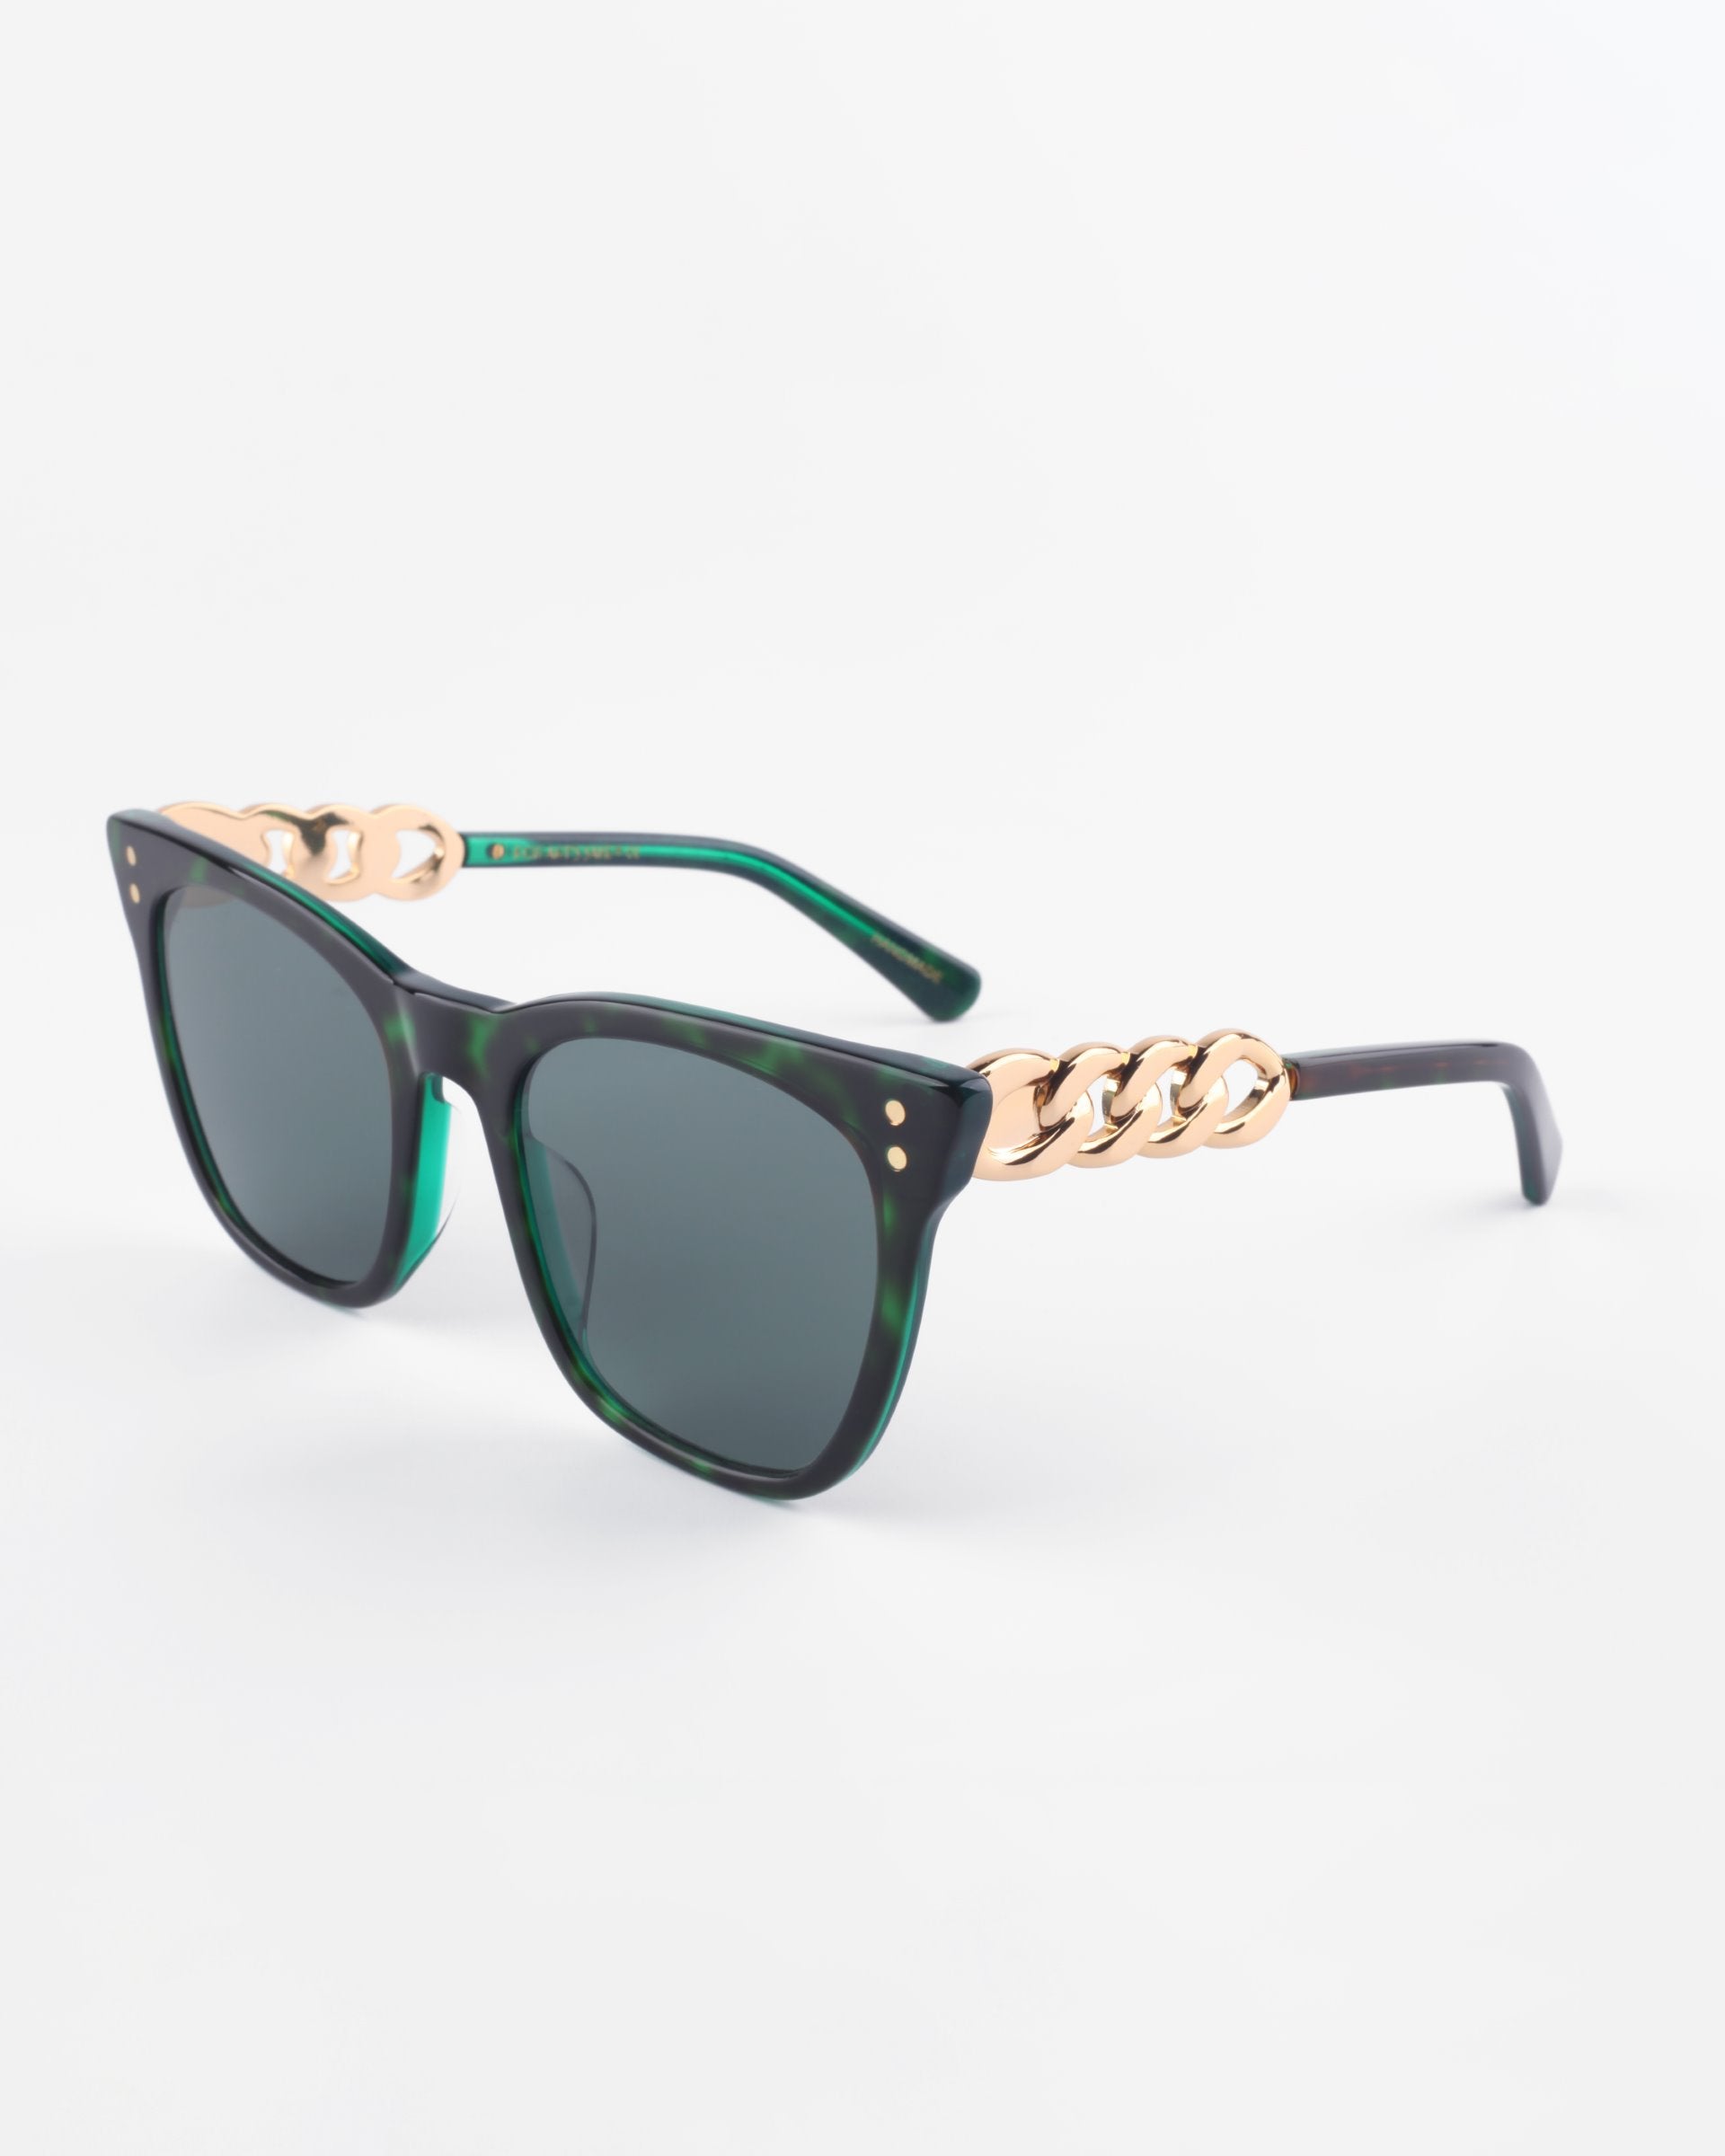 A pair of stylish, square-shaped Deco sunglasses from For Art&#39;s Sake® with dark lenses and green tortoiseshell acetate frames. The frames feature gold-colored chain link details at the temples, adding an elegant touch to the design. The background is plain white, highlighting the Deco sunglasses from For Art&#39;s Sake®.